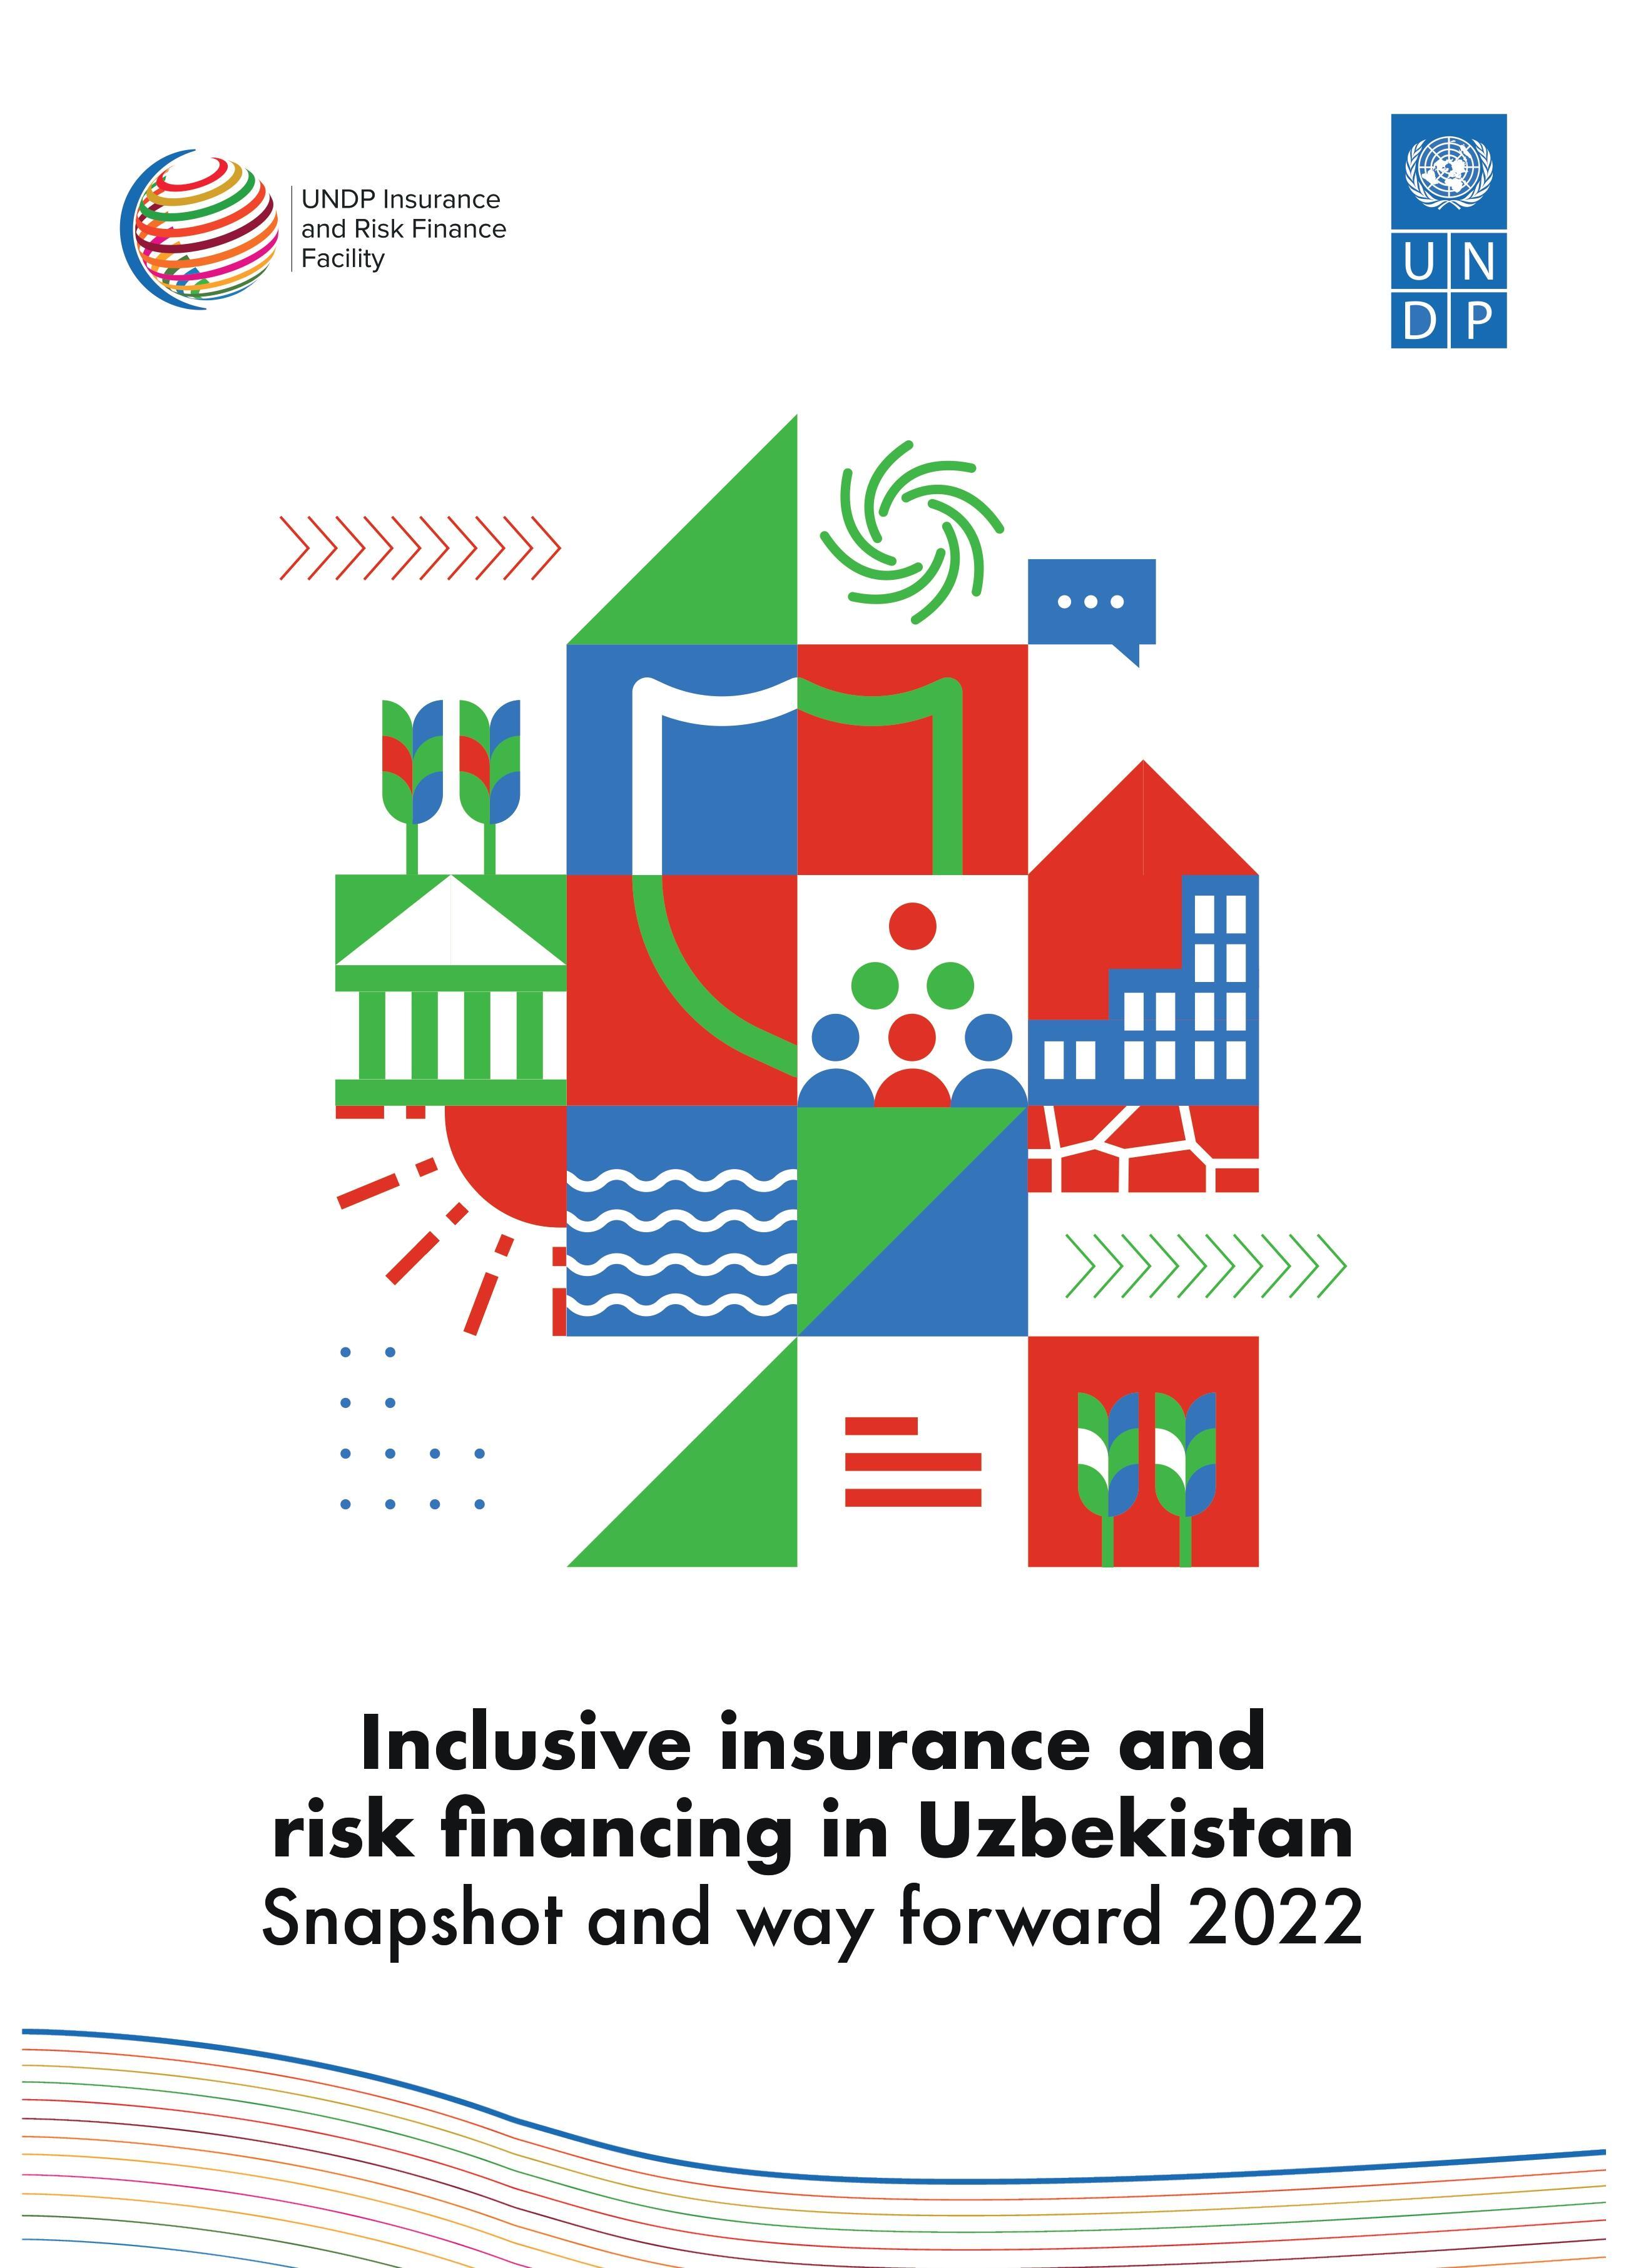 Inclusive insurance and risk financing in Uzbekistan. Snapshot and way forward 2022